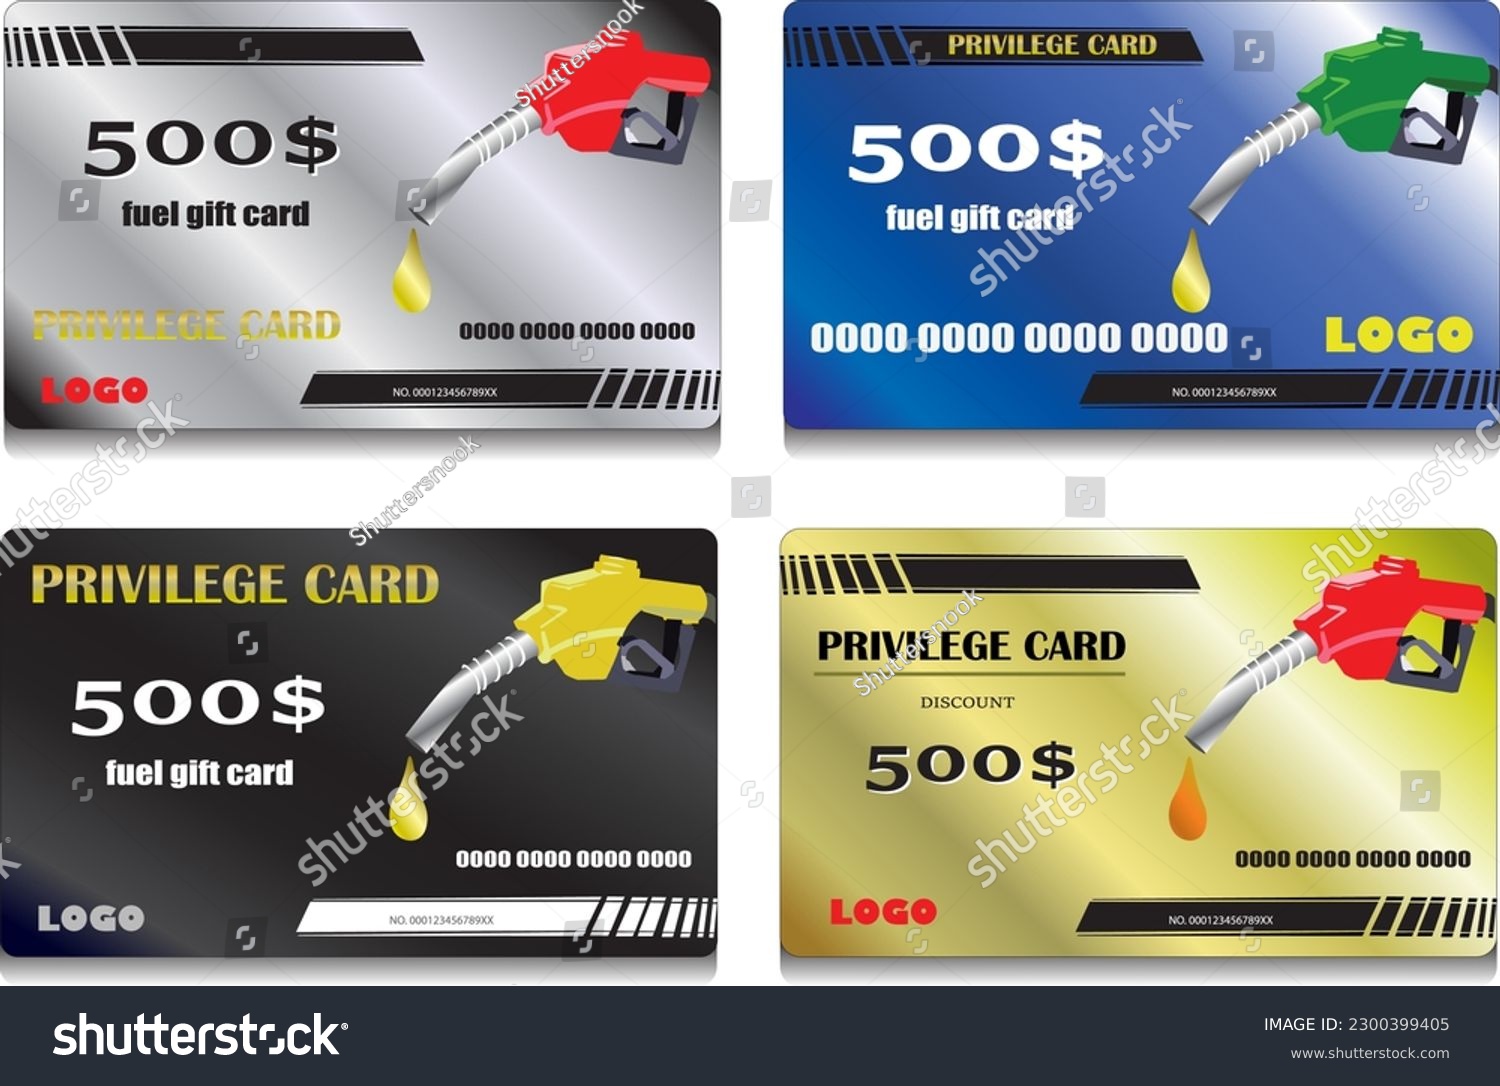 SVG of Fuel discount cards. refuel gift coupon, gasoline voucher on free petrol fueling diesel vehicle or auto oil, privilege card template of gas station service, vector illustration of fuel discount. svg